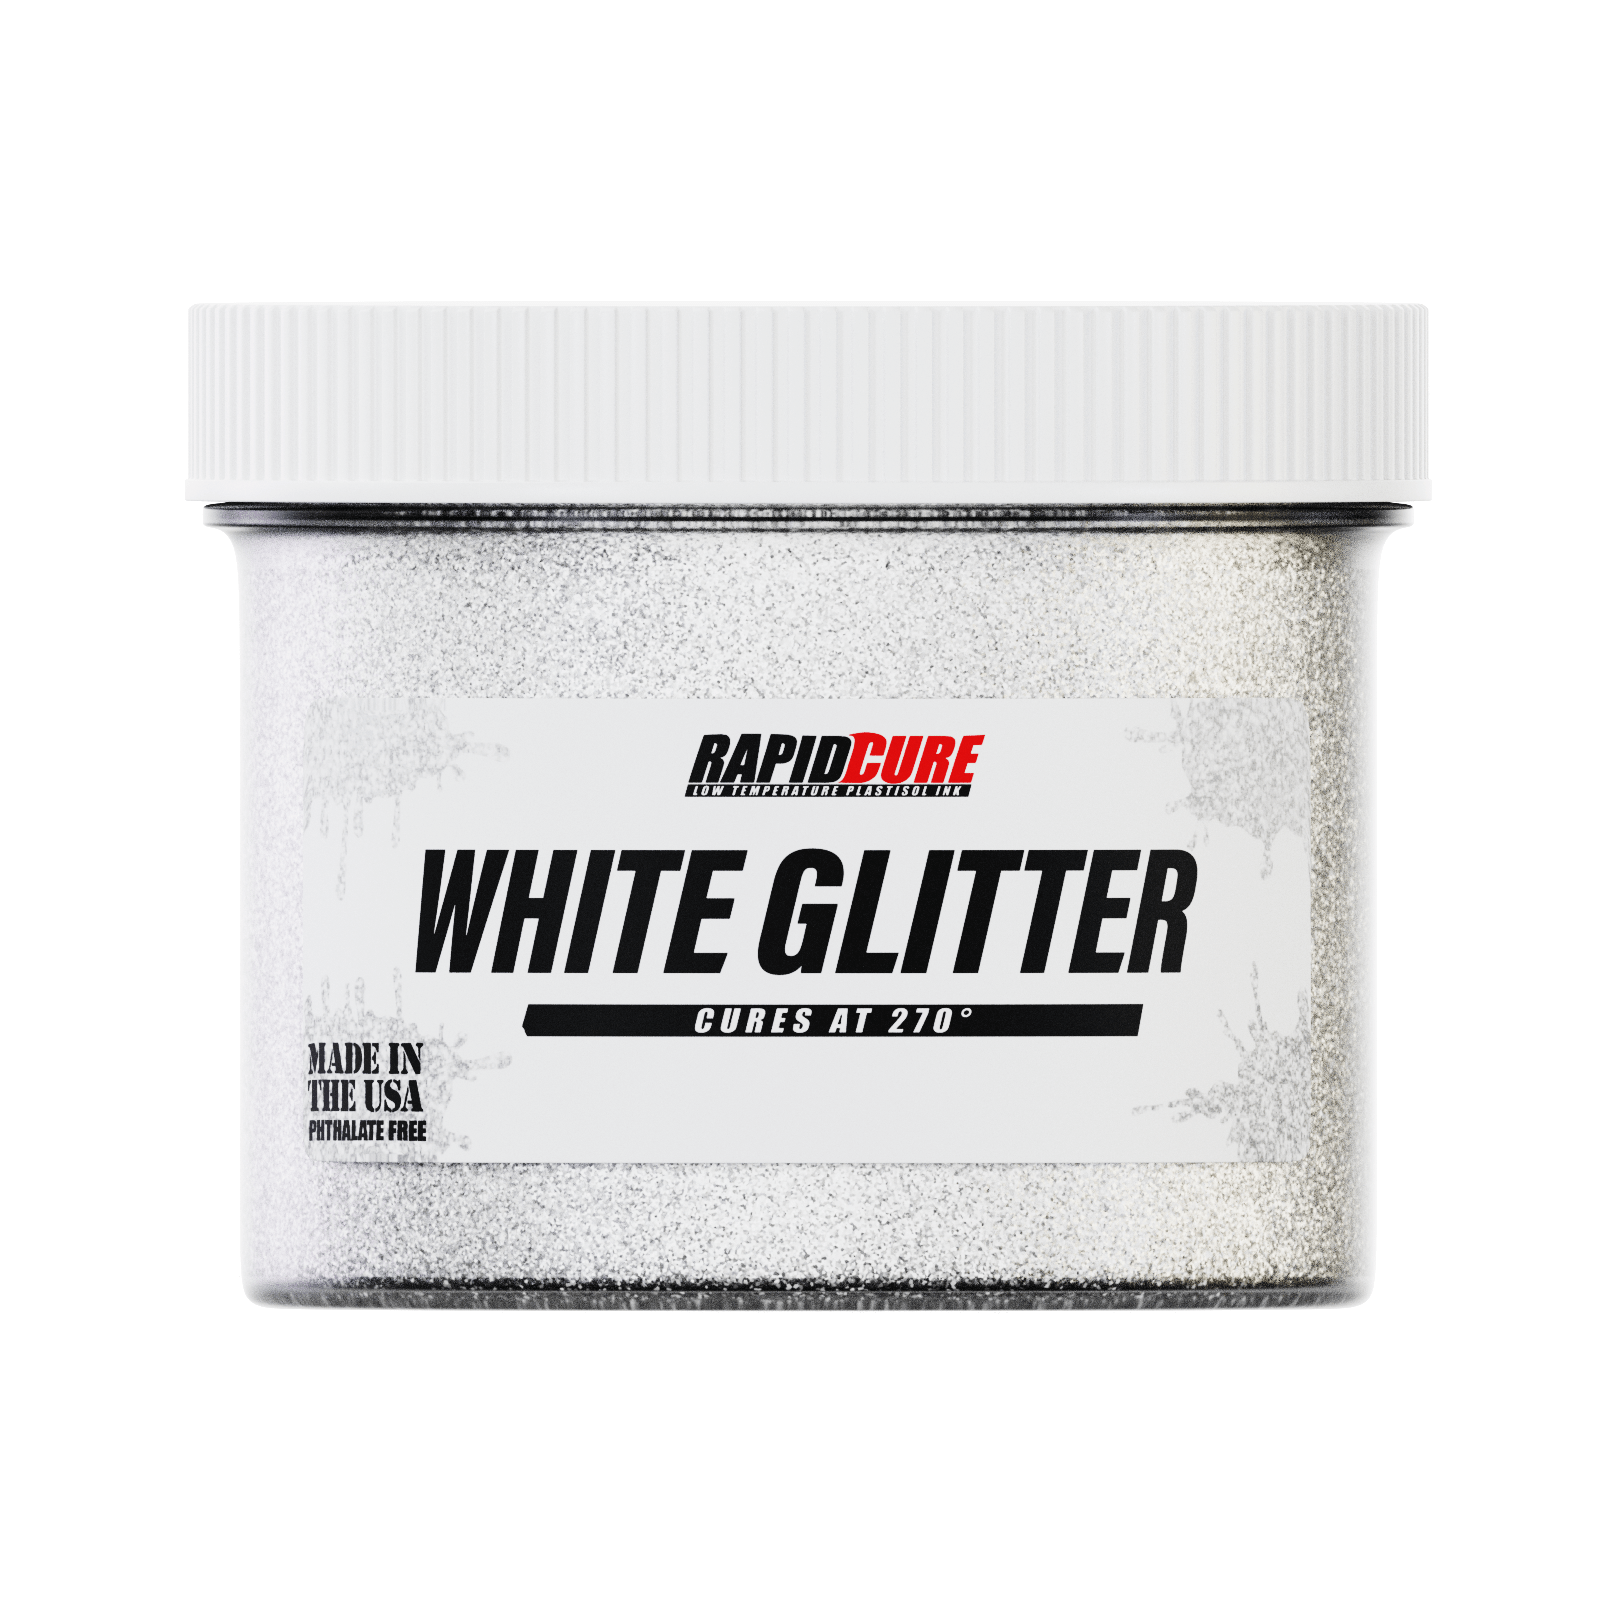 Rapid Cure White Glitter Screen Printing Plastisol Ink | Get It Now 5 Gallon